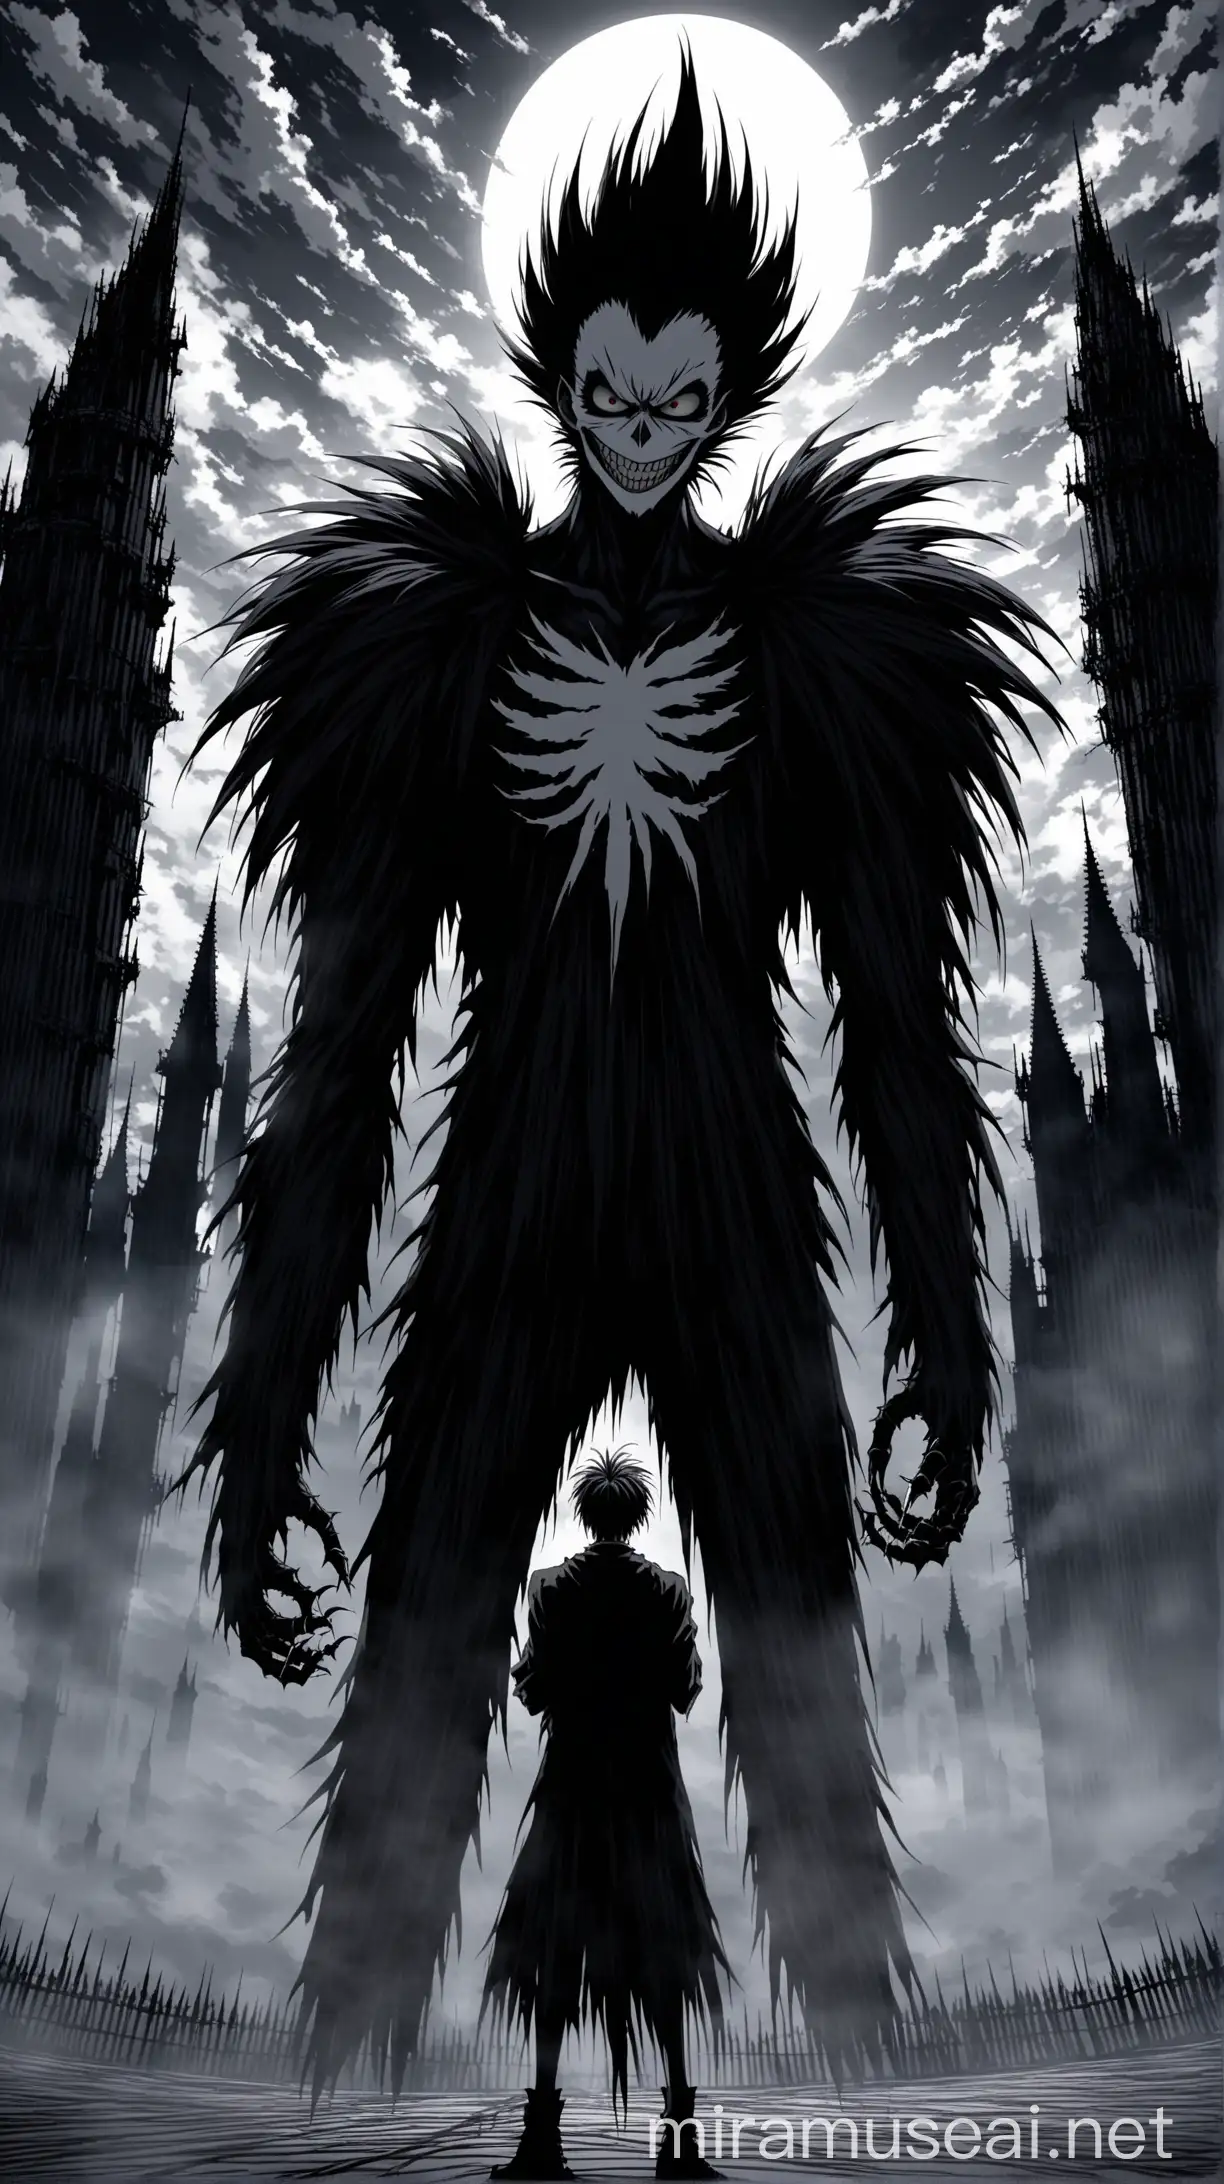 Ryuk Writing Death Note by Tower